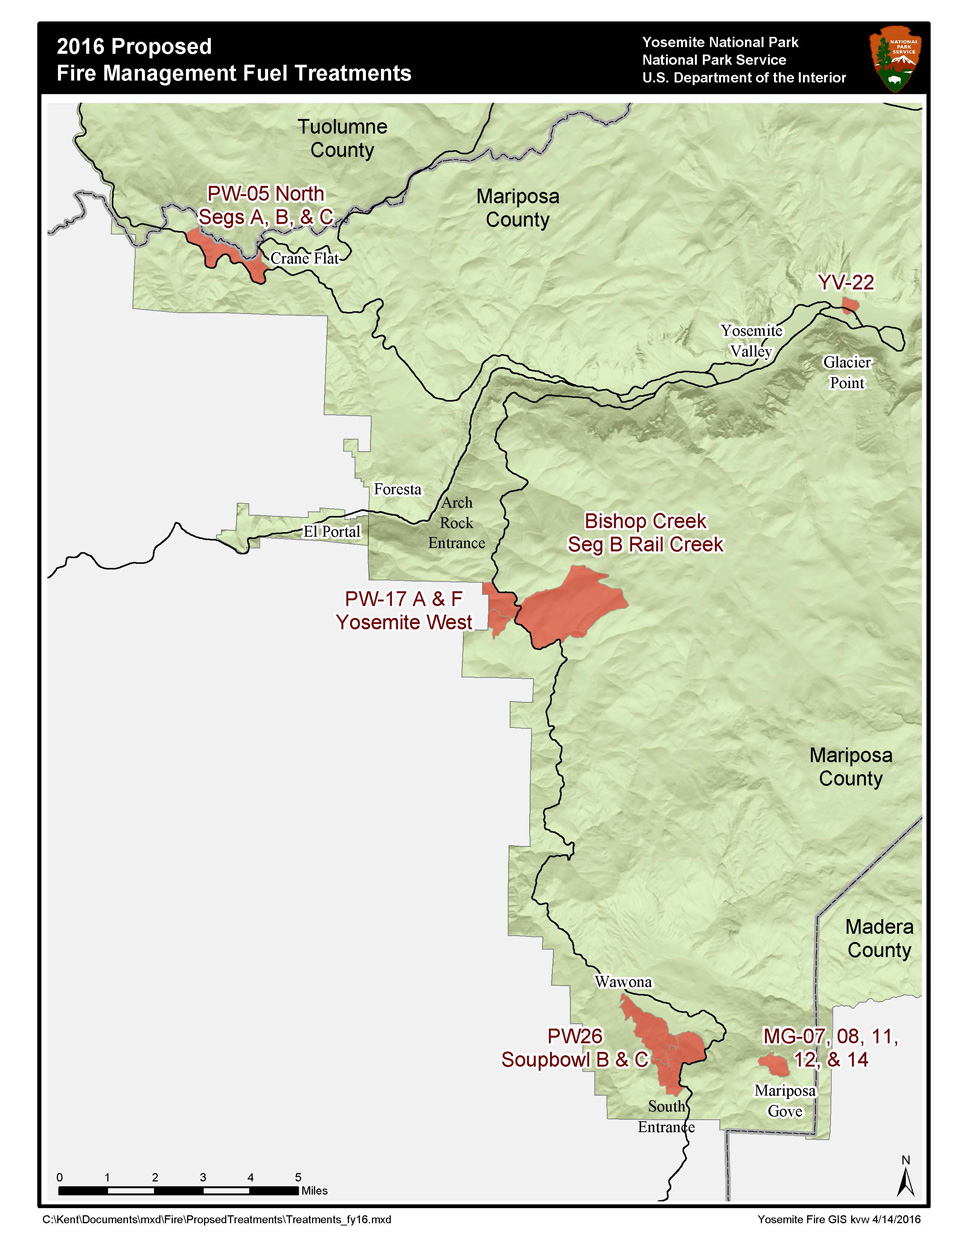 2016 proposed fire and fuels treatment map